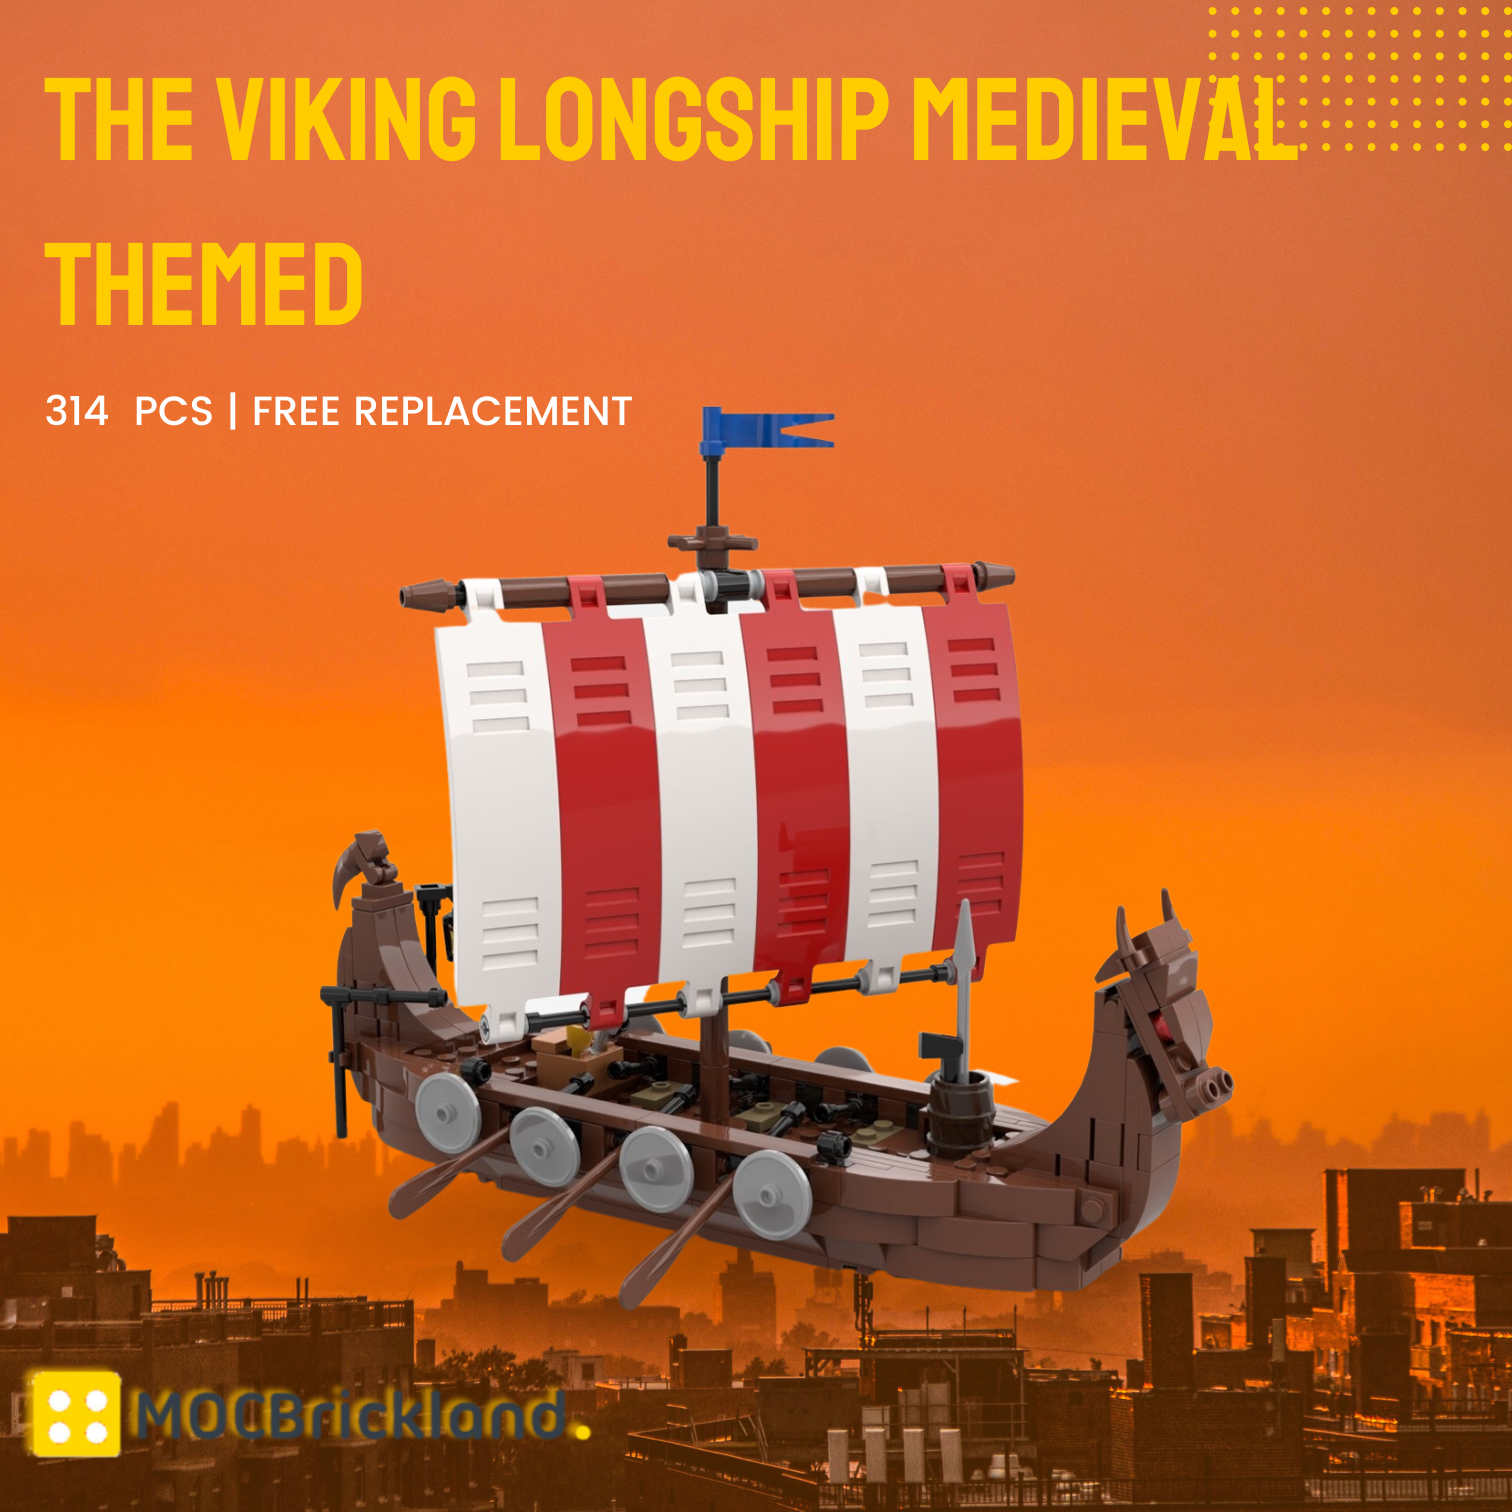 The Viking Longship Medieval Themed MOC-98225 Creator With 314 Pieces